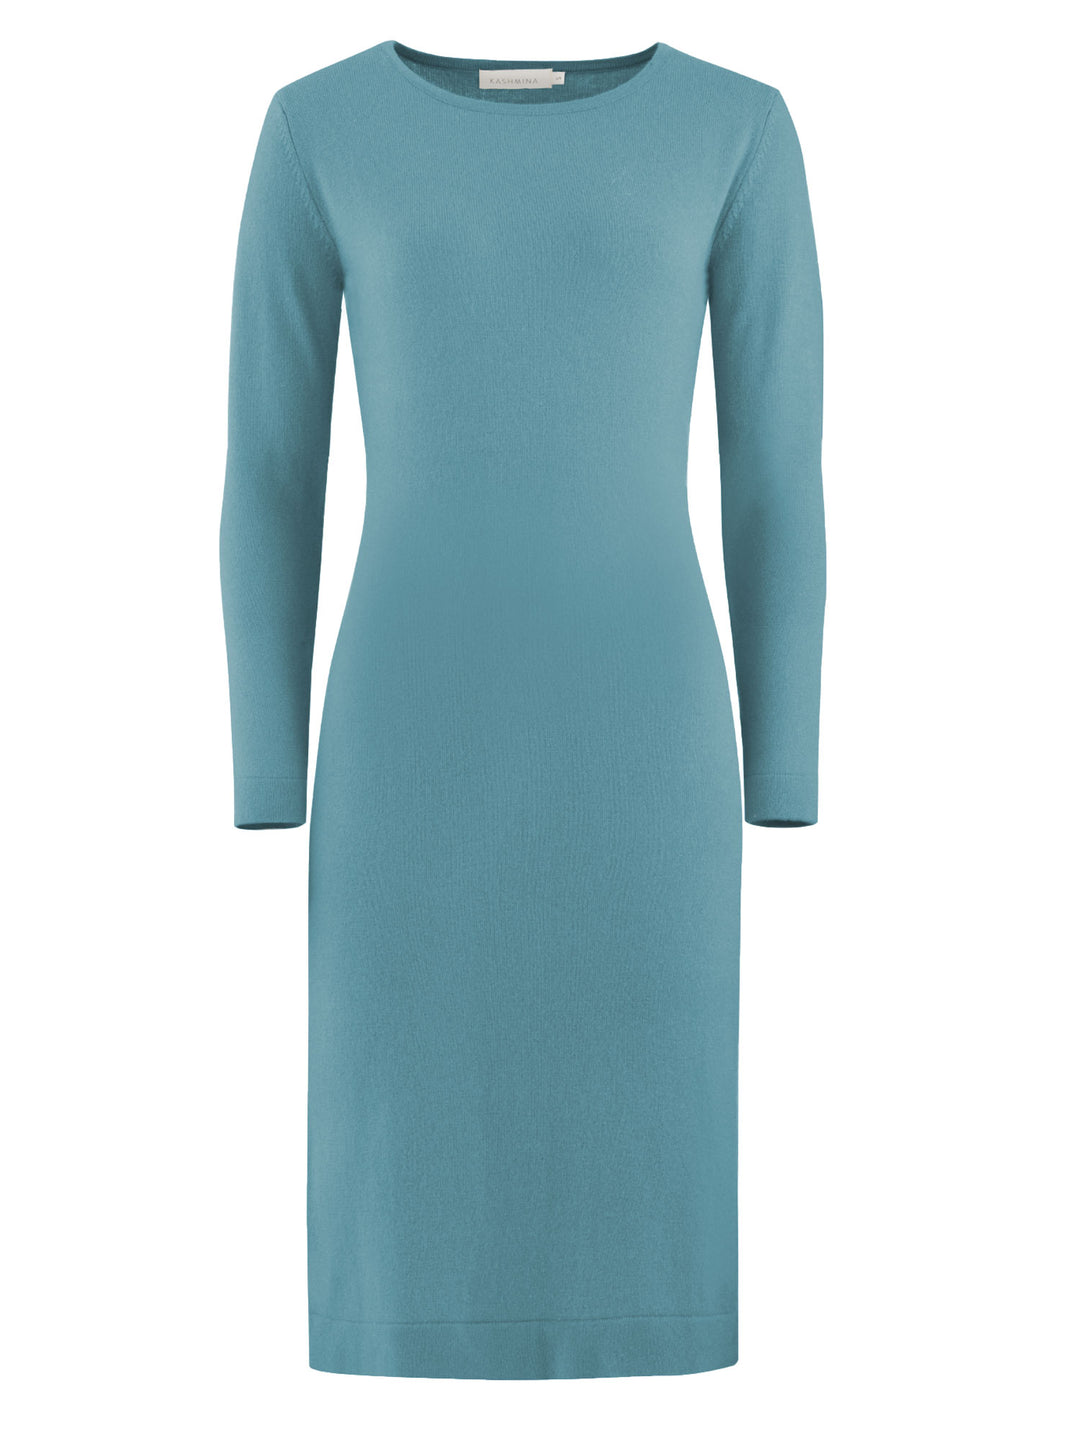 Cashmere dress arctic blue from Kashmina in 100% pure cashmere